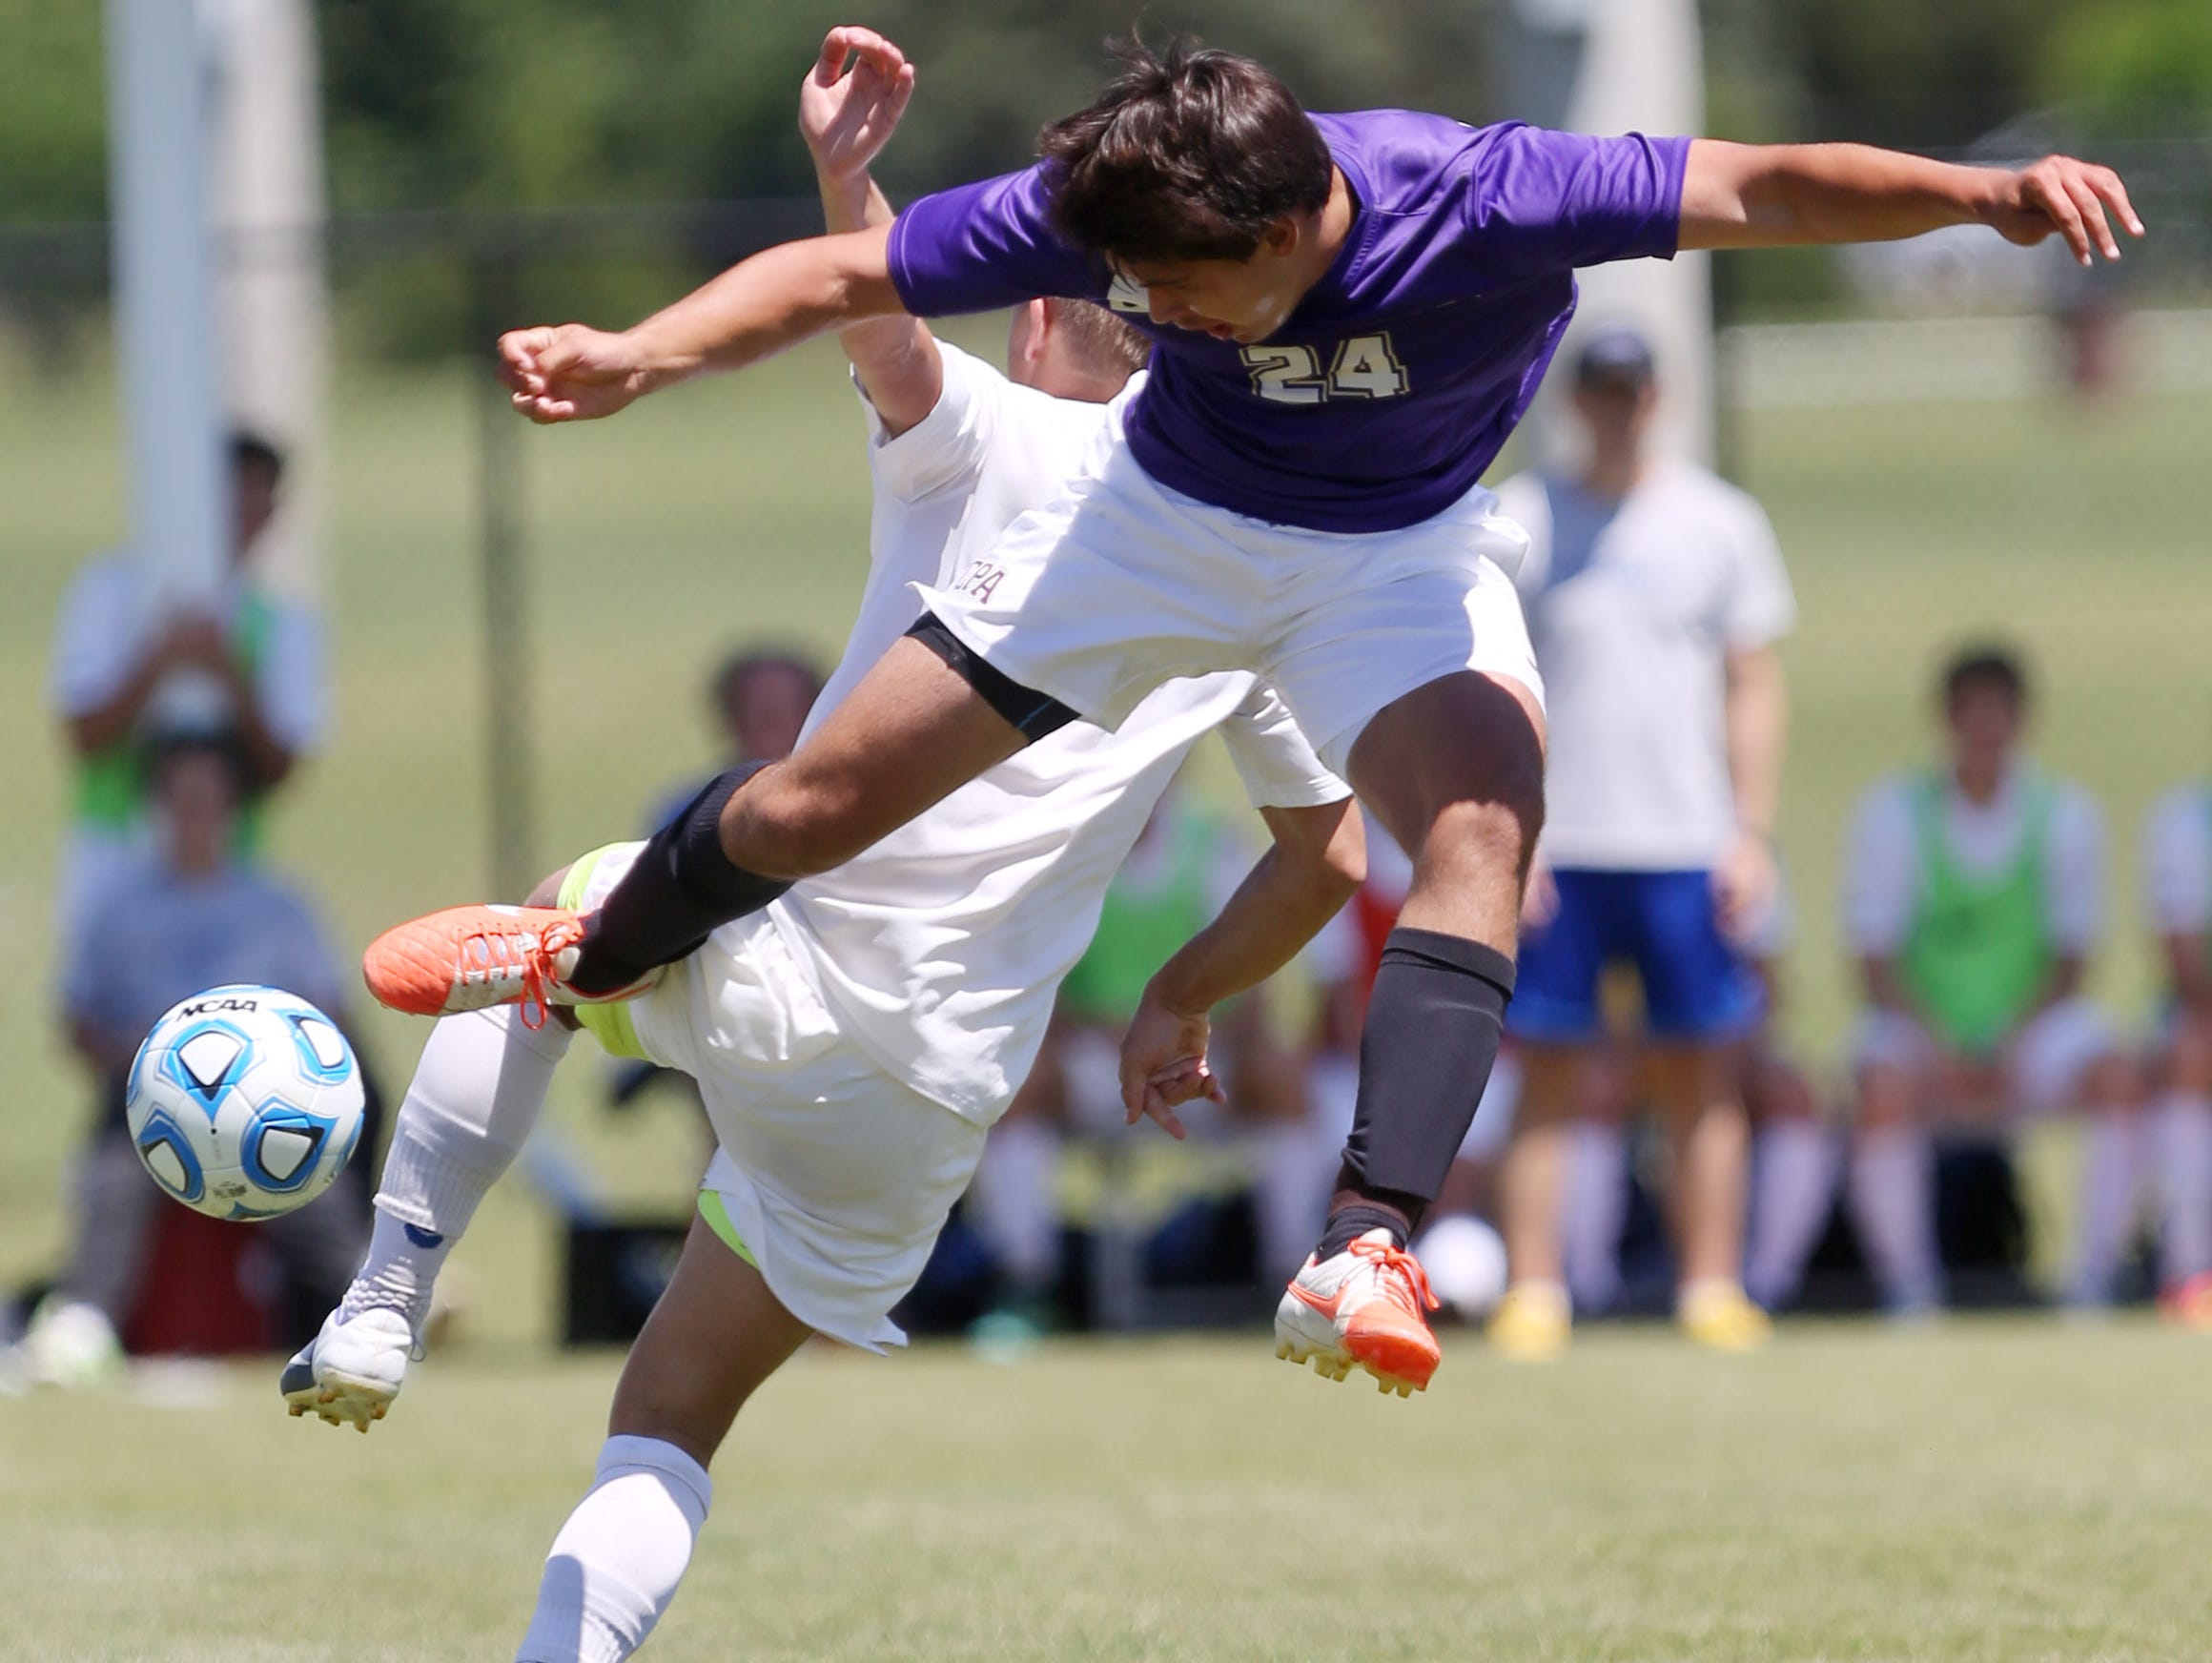 CPA's Spencer Hagan (24) lunges past Dallas Dunn (6) of CAK to get possession during the A-AA title match Friday.